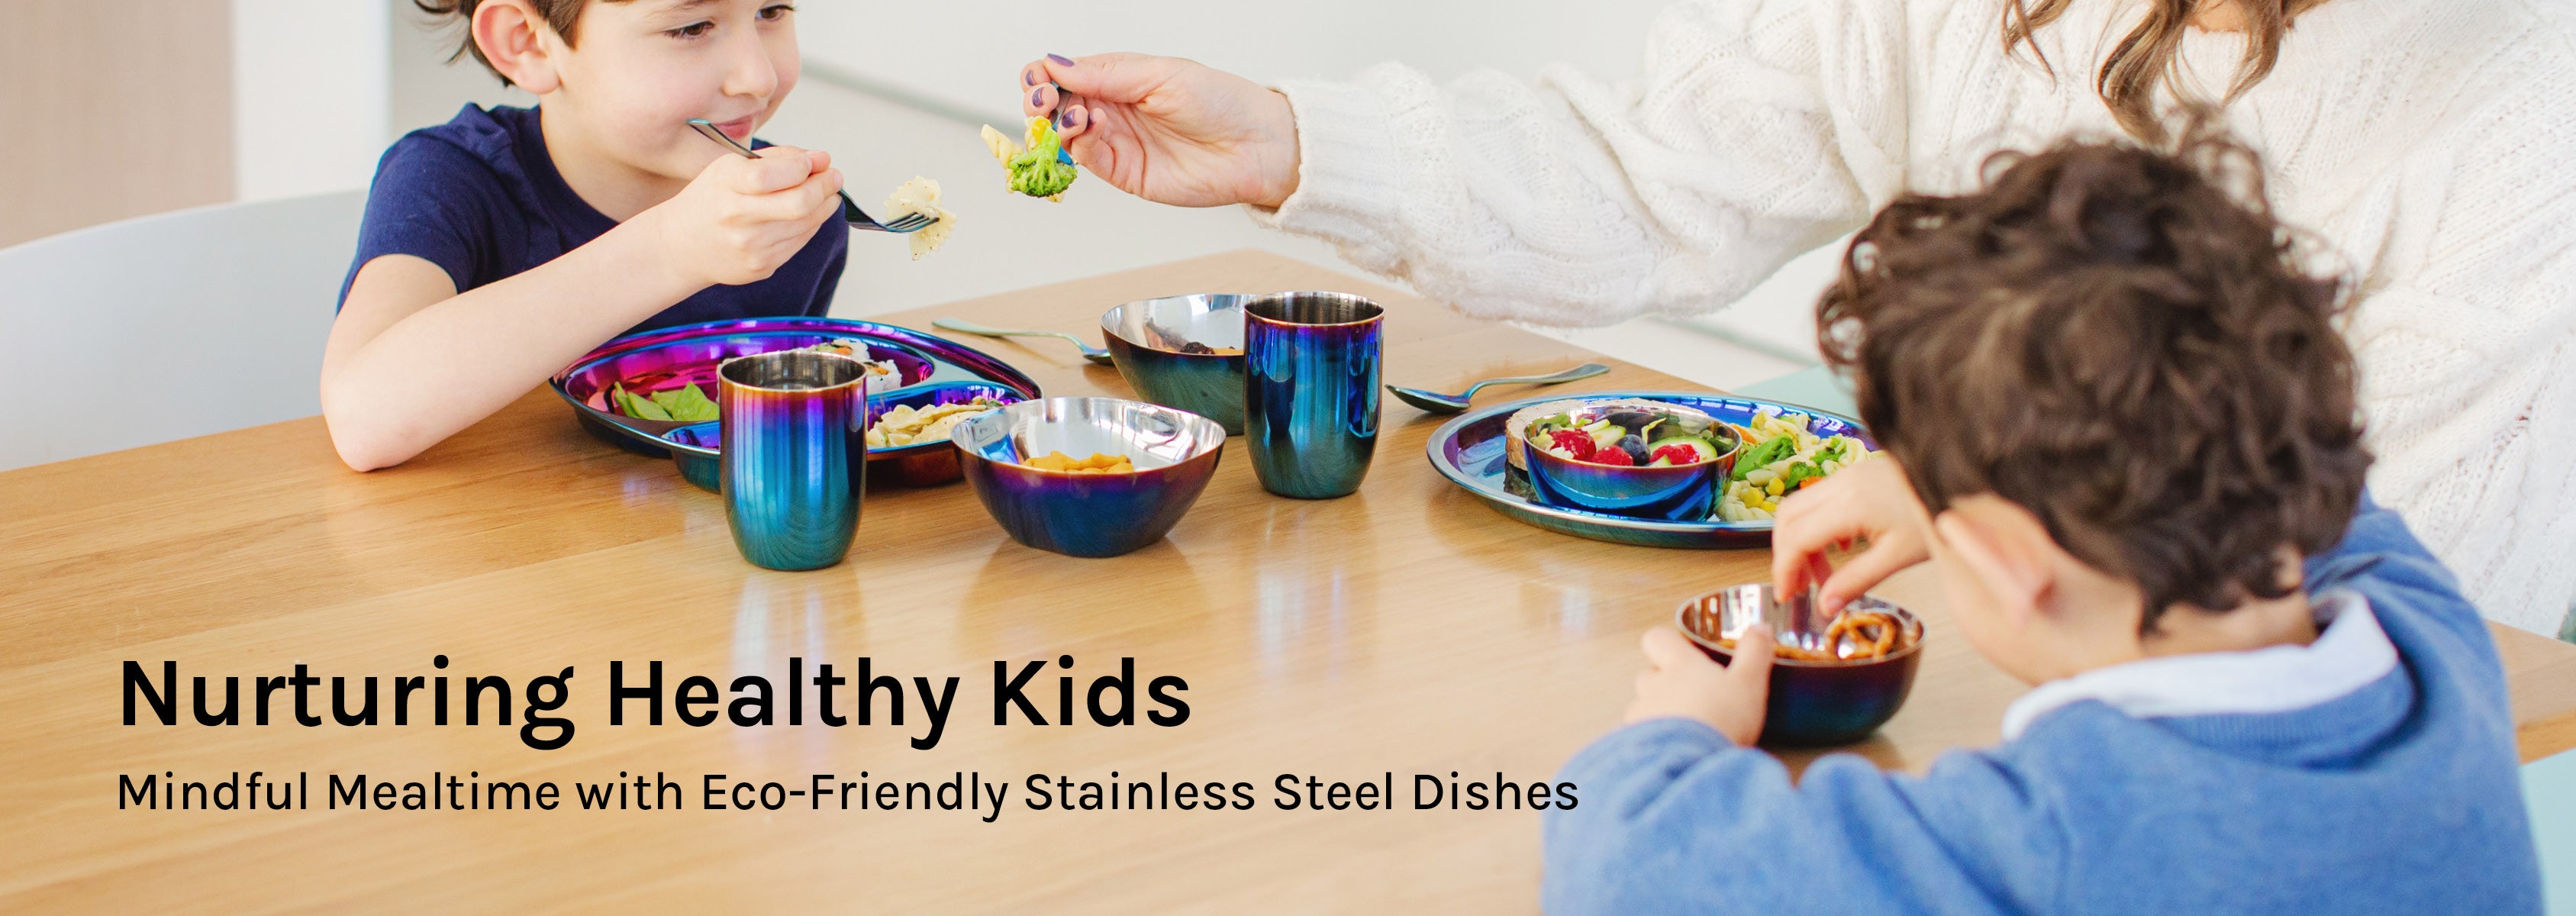 Two young kids eating at the dinner table with their mom using Ahimsa's Iridescent-Blue Mindful Mealtime Sets and 12 oz snack bowls